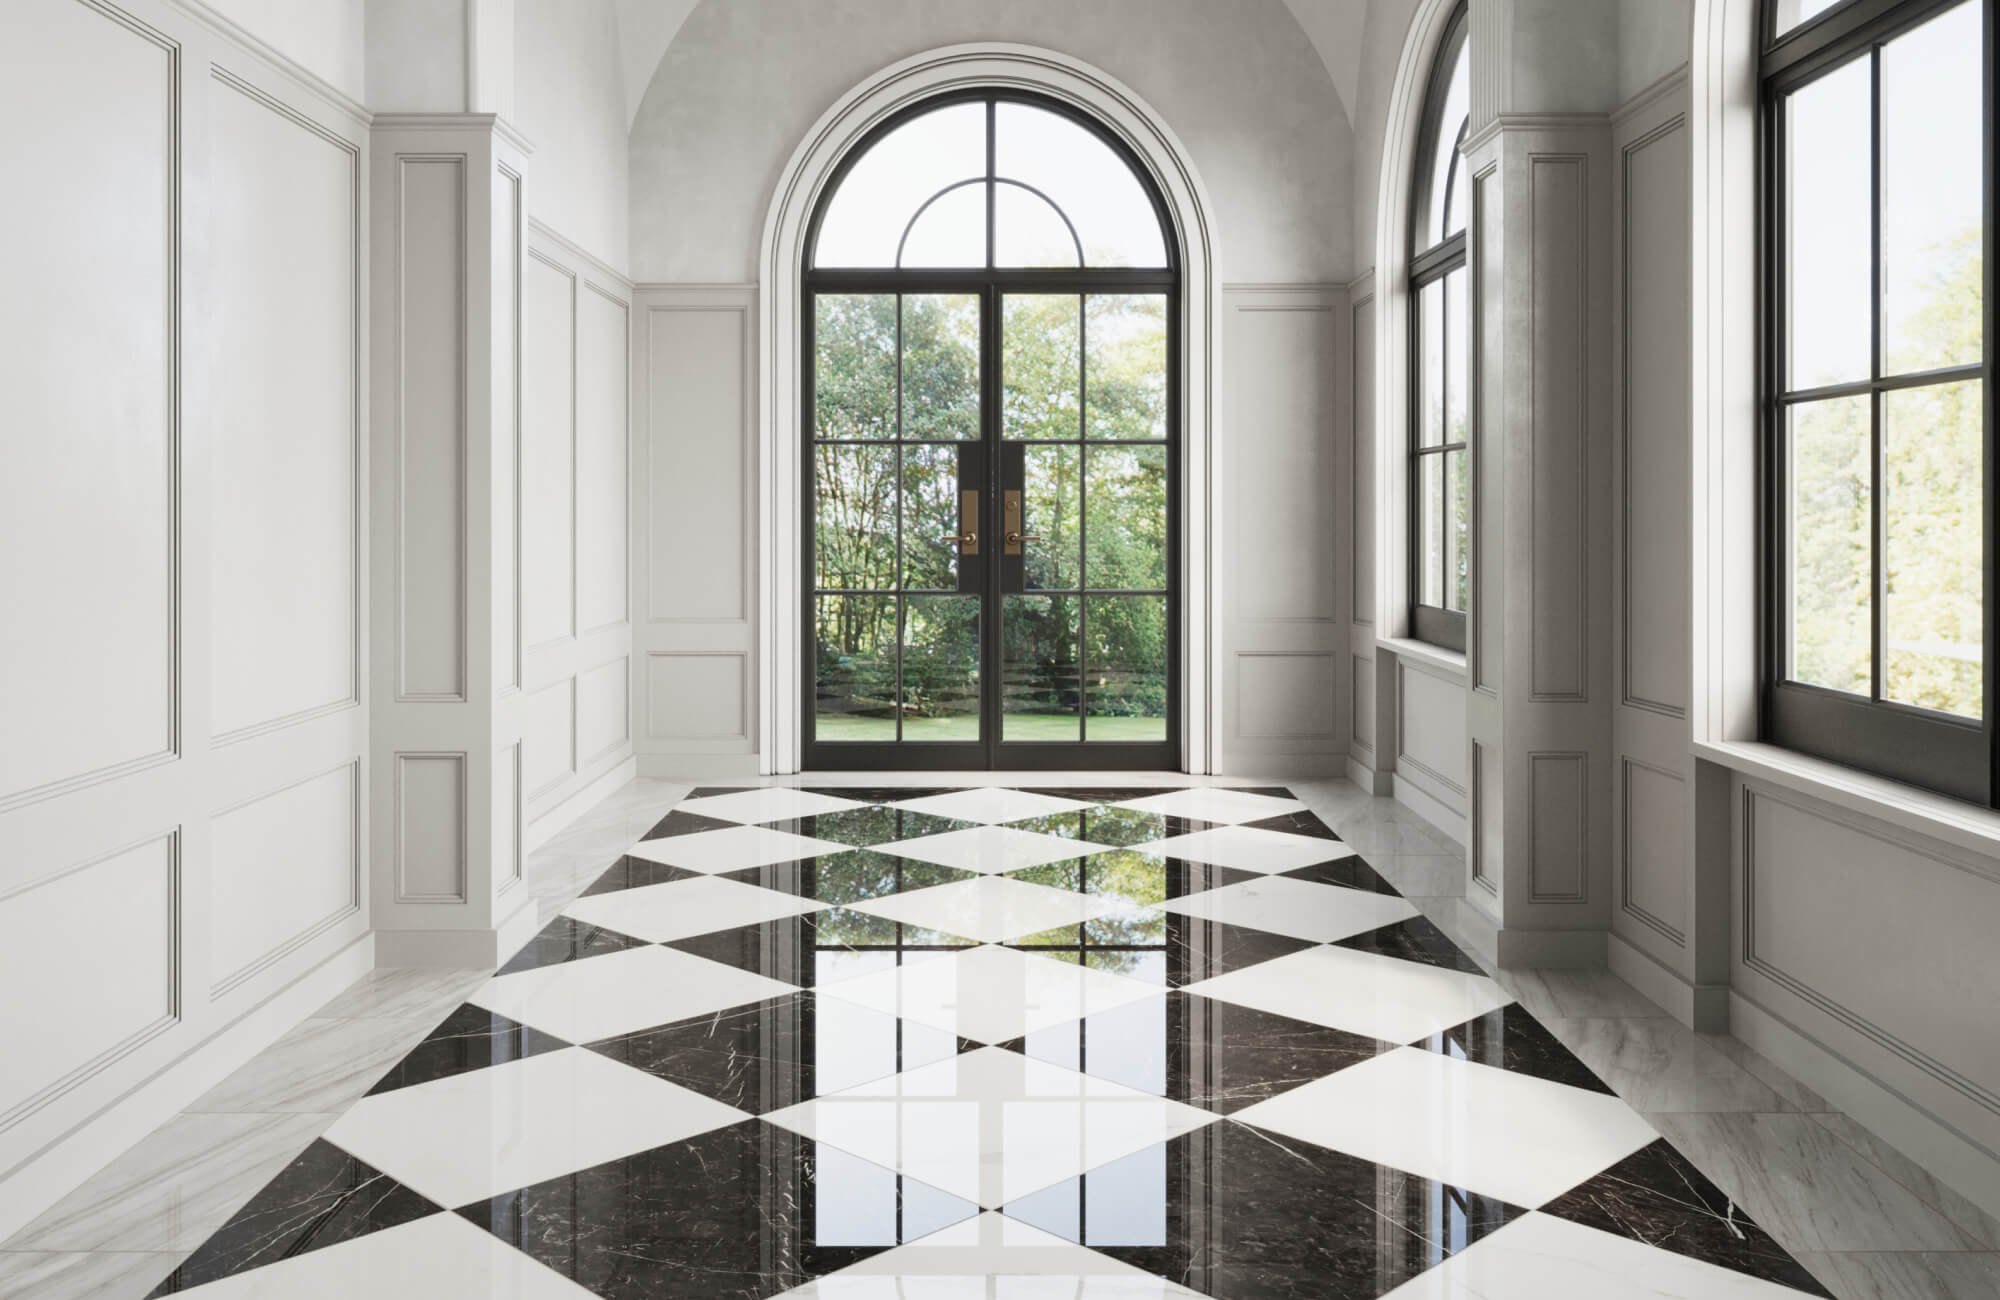 Elegant hallway featuring black and white checkerboard floor tiles, large arched windows, and a grand chandelier